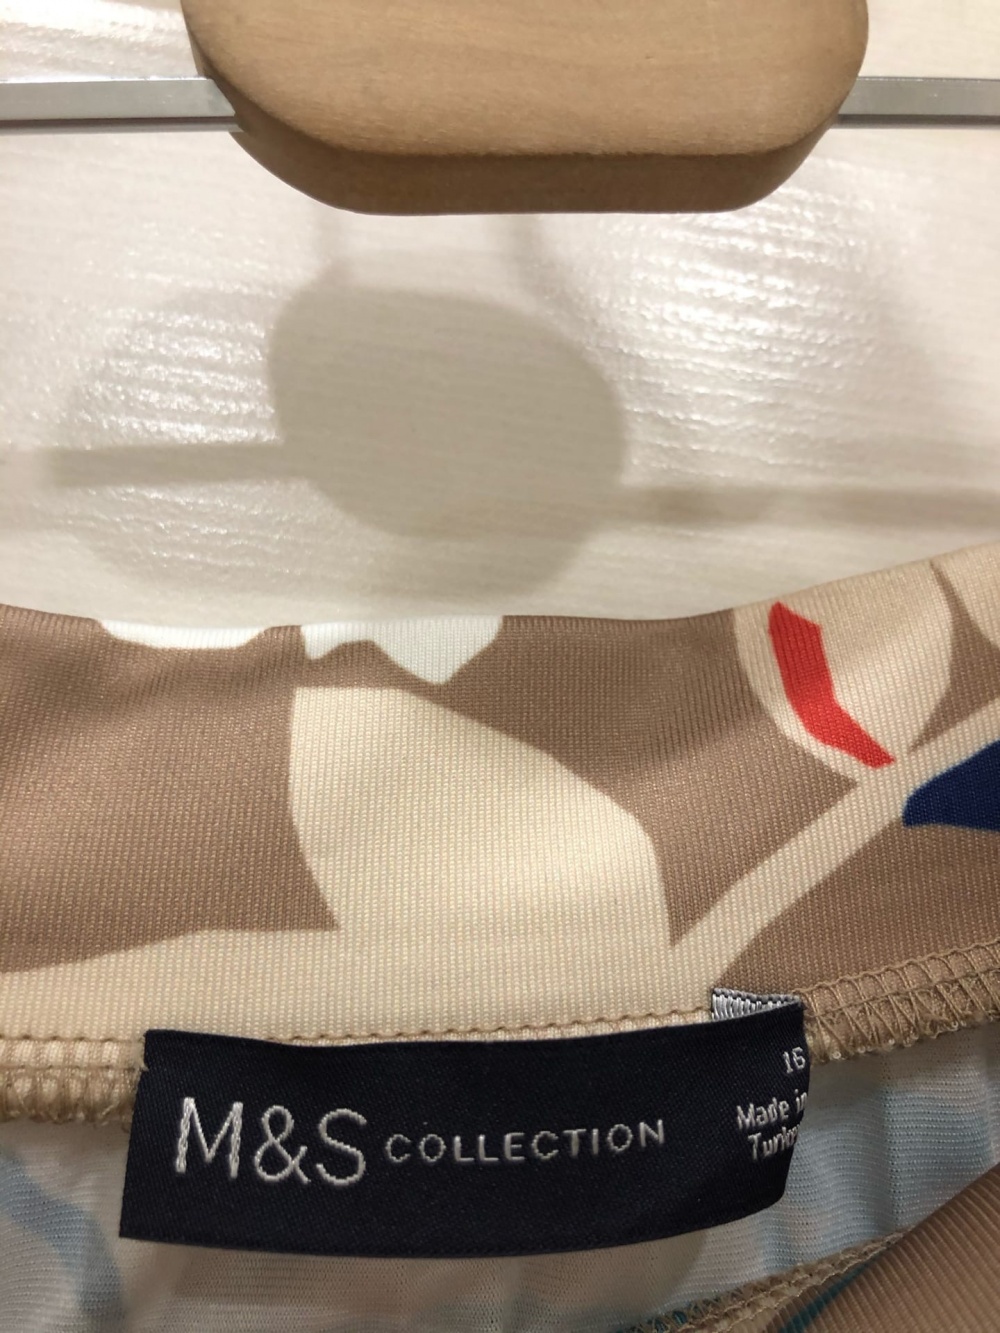 Юбка Marks and Spencer . Размер EUR 44.